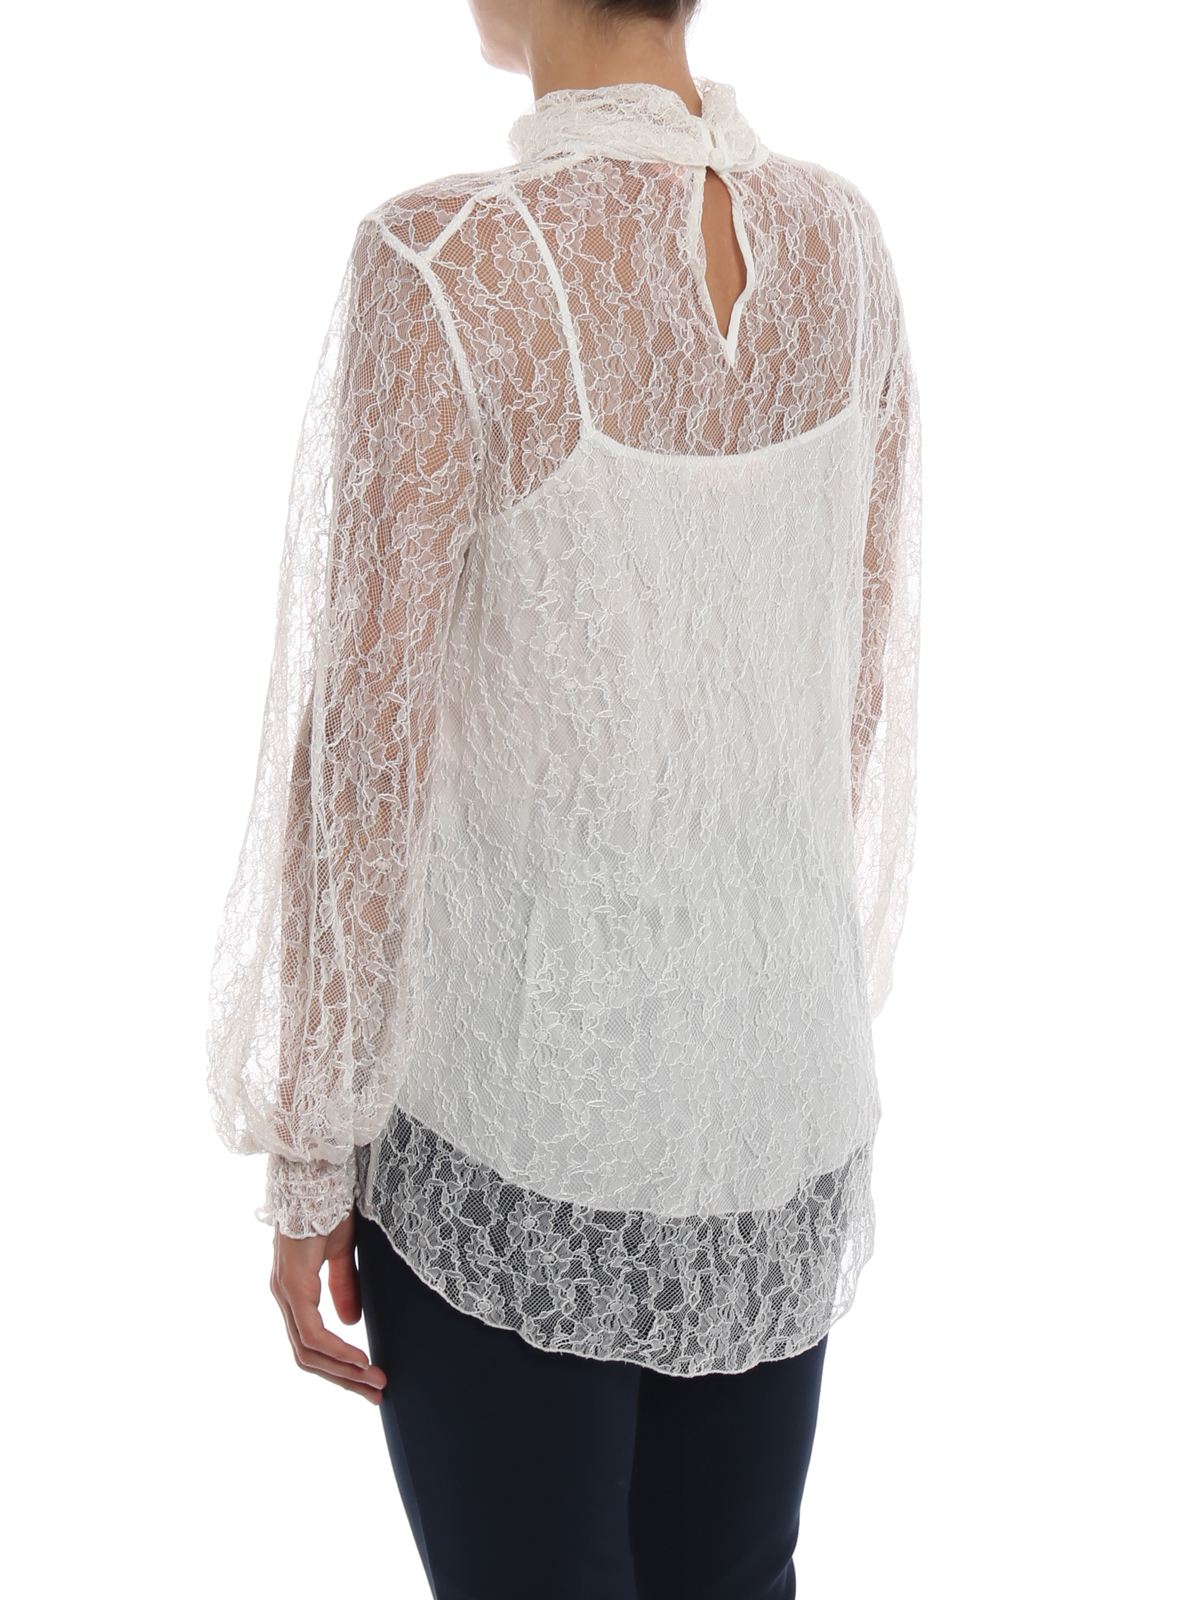 See by Chloé - White long sleeve lace blouse - blouses - S18AHT25036110